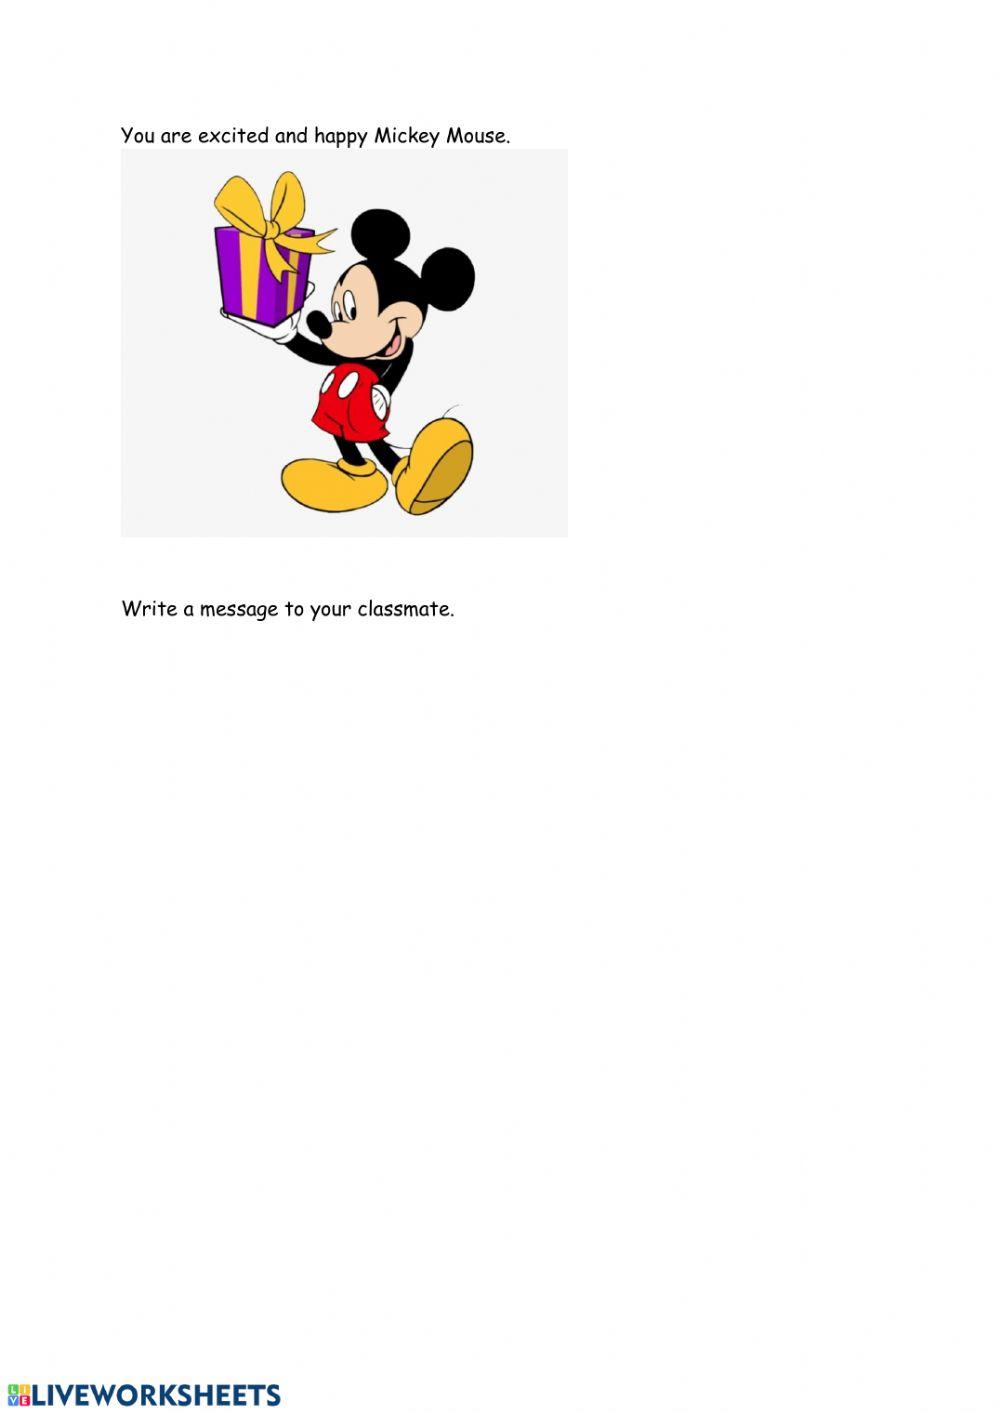 A message from Mickey Mouse